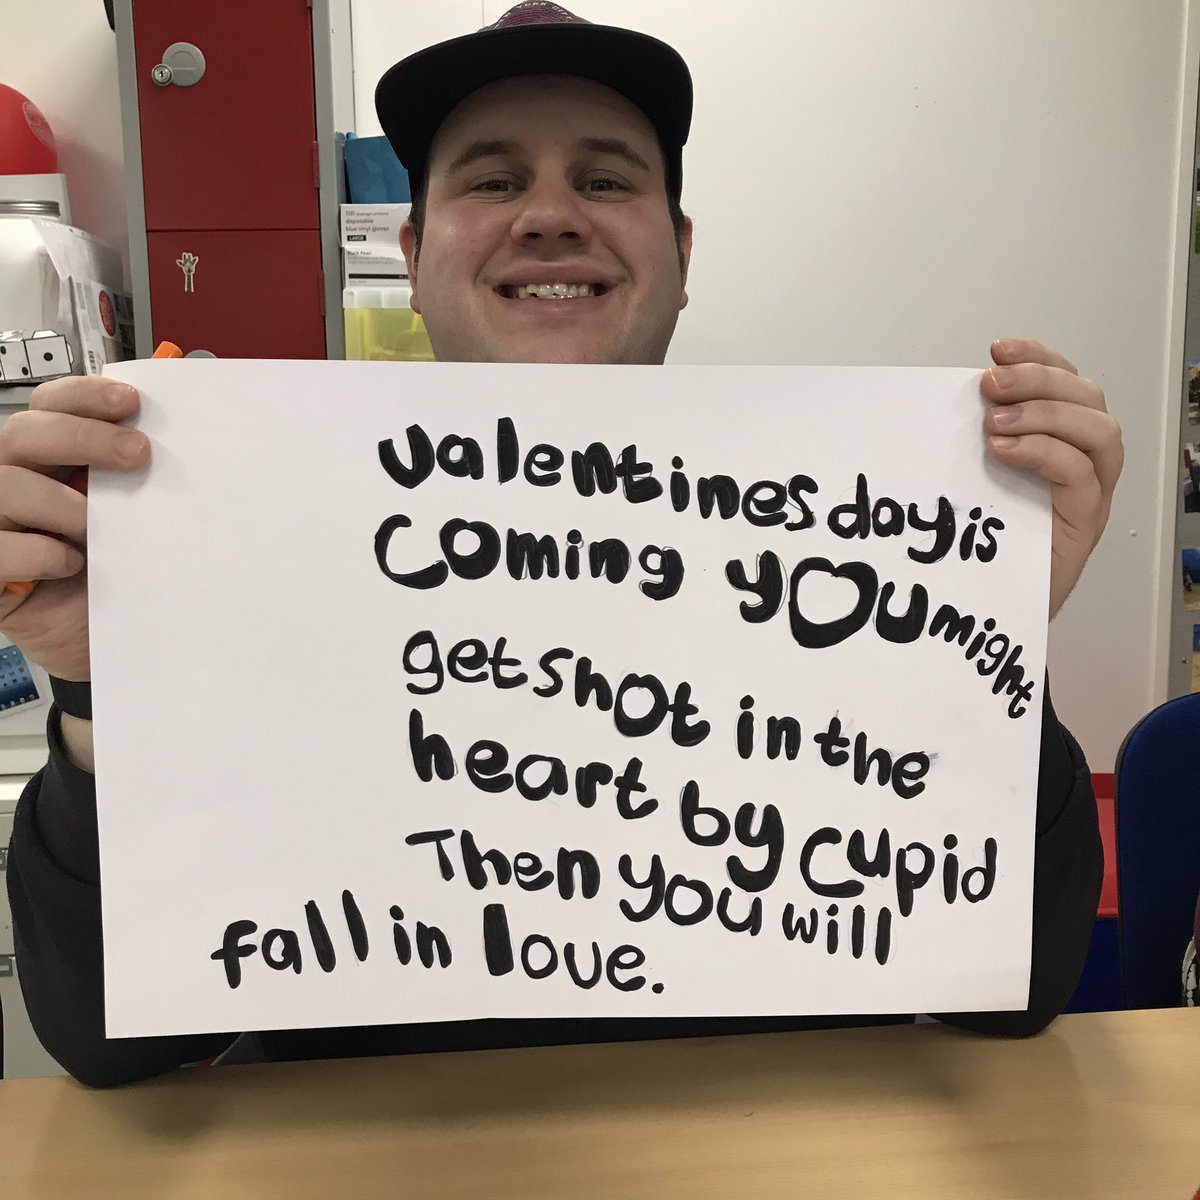 #MondayMotivation courtesy of Peter for enterprise19 😁💛#valentinesdayiscoming 

Buy your loved one a fabulous card this year designed by one of our young artists. Because we would most definitely do a Happy dance if you did. 
enterprise19.co.uk